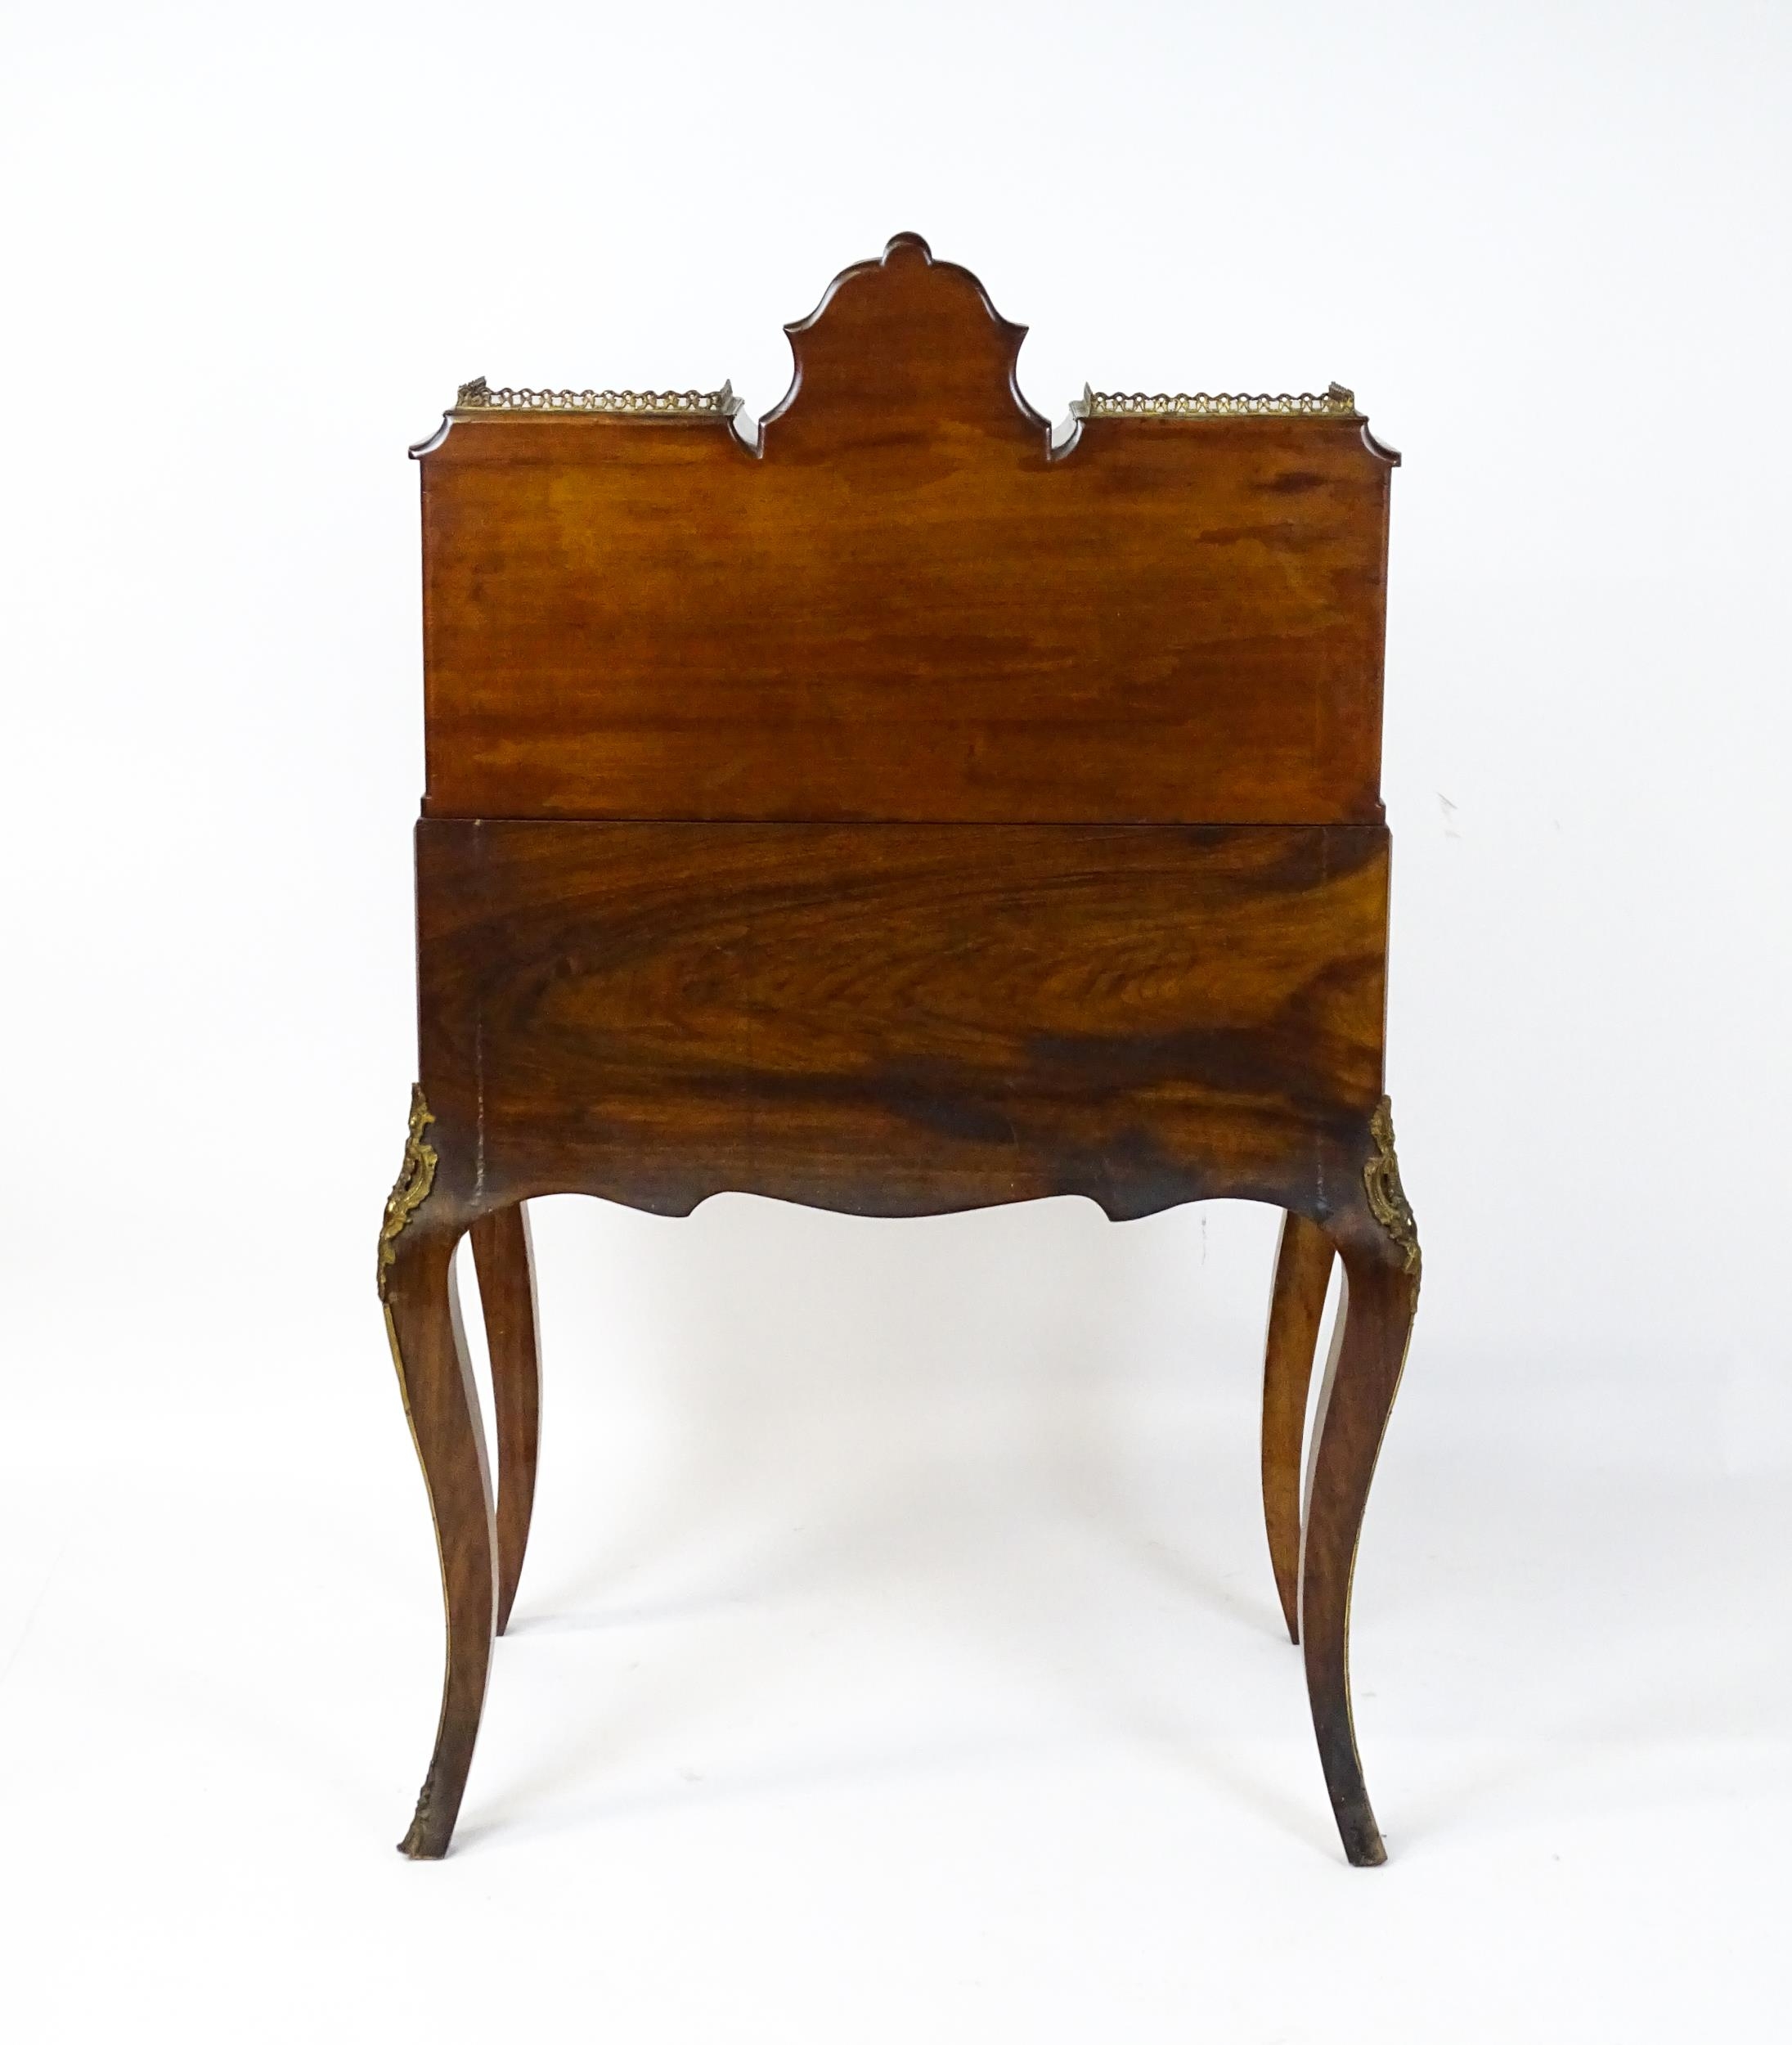 A 19thC burr walnut Bonheur du jour with a mirrored back stand and flanked by two glazed cabinets - Image 2 of 11